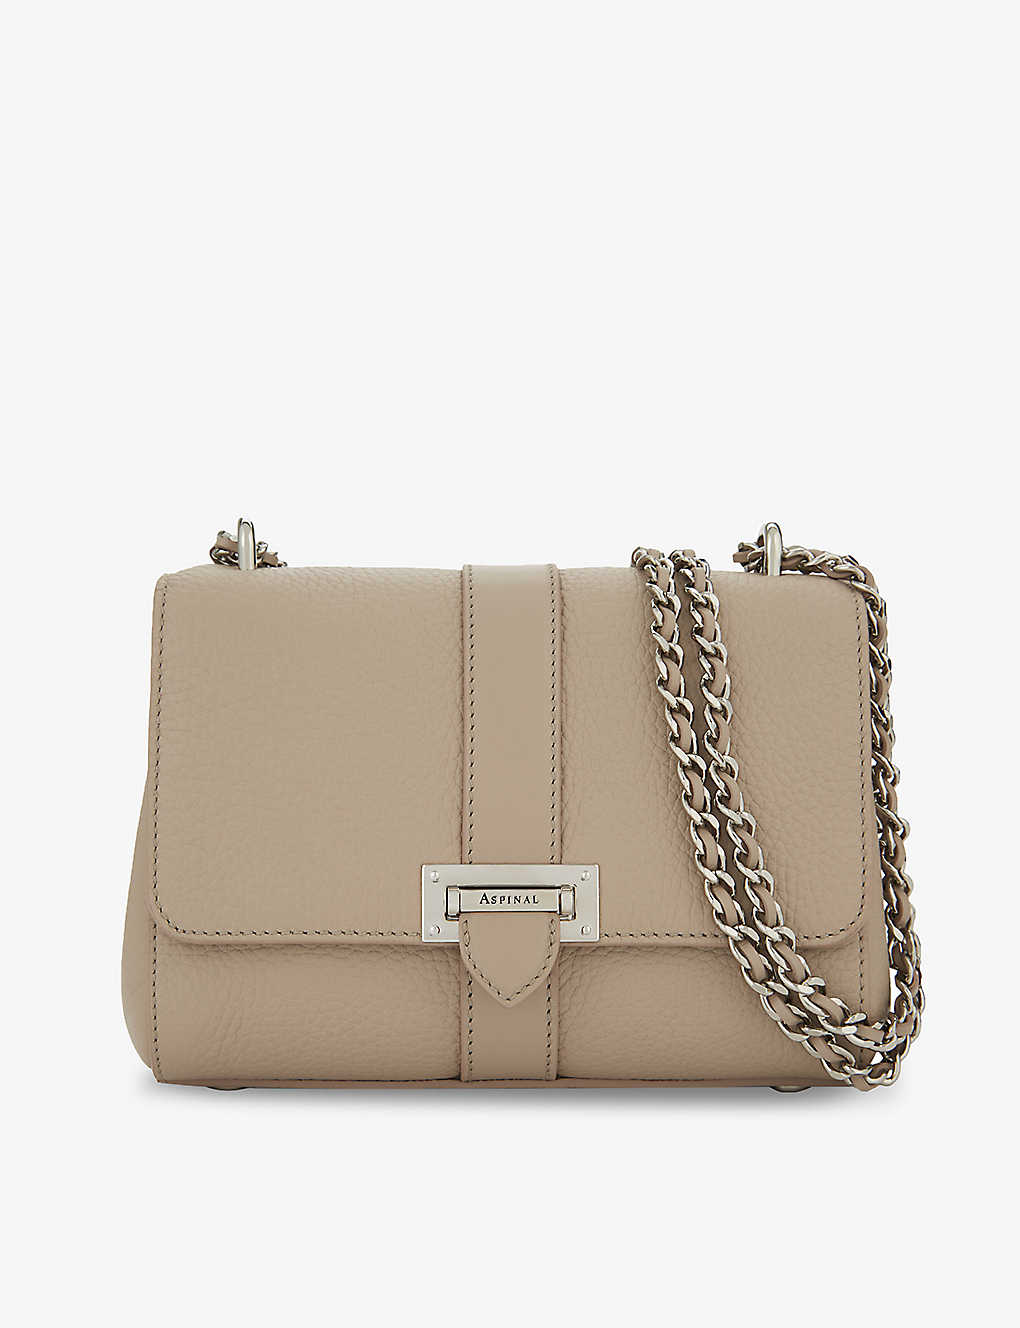 ASPINAL OF LONDON ASPINAL OF LONDON BROWN LOTTIE SMALL GRAINED-LEATHER SHOULDER BAG,62583749